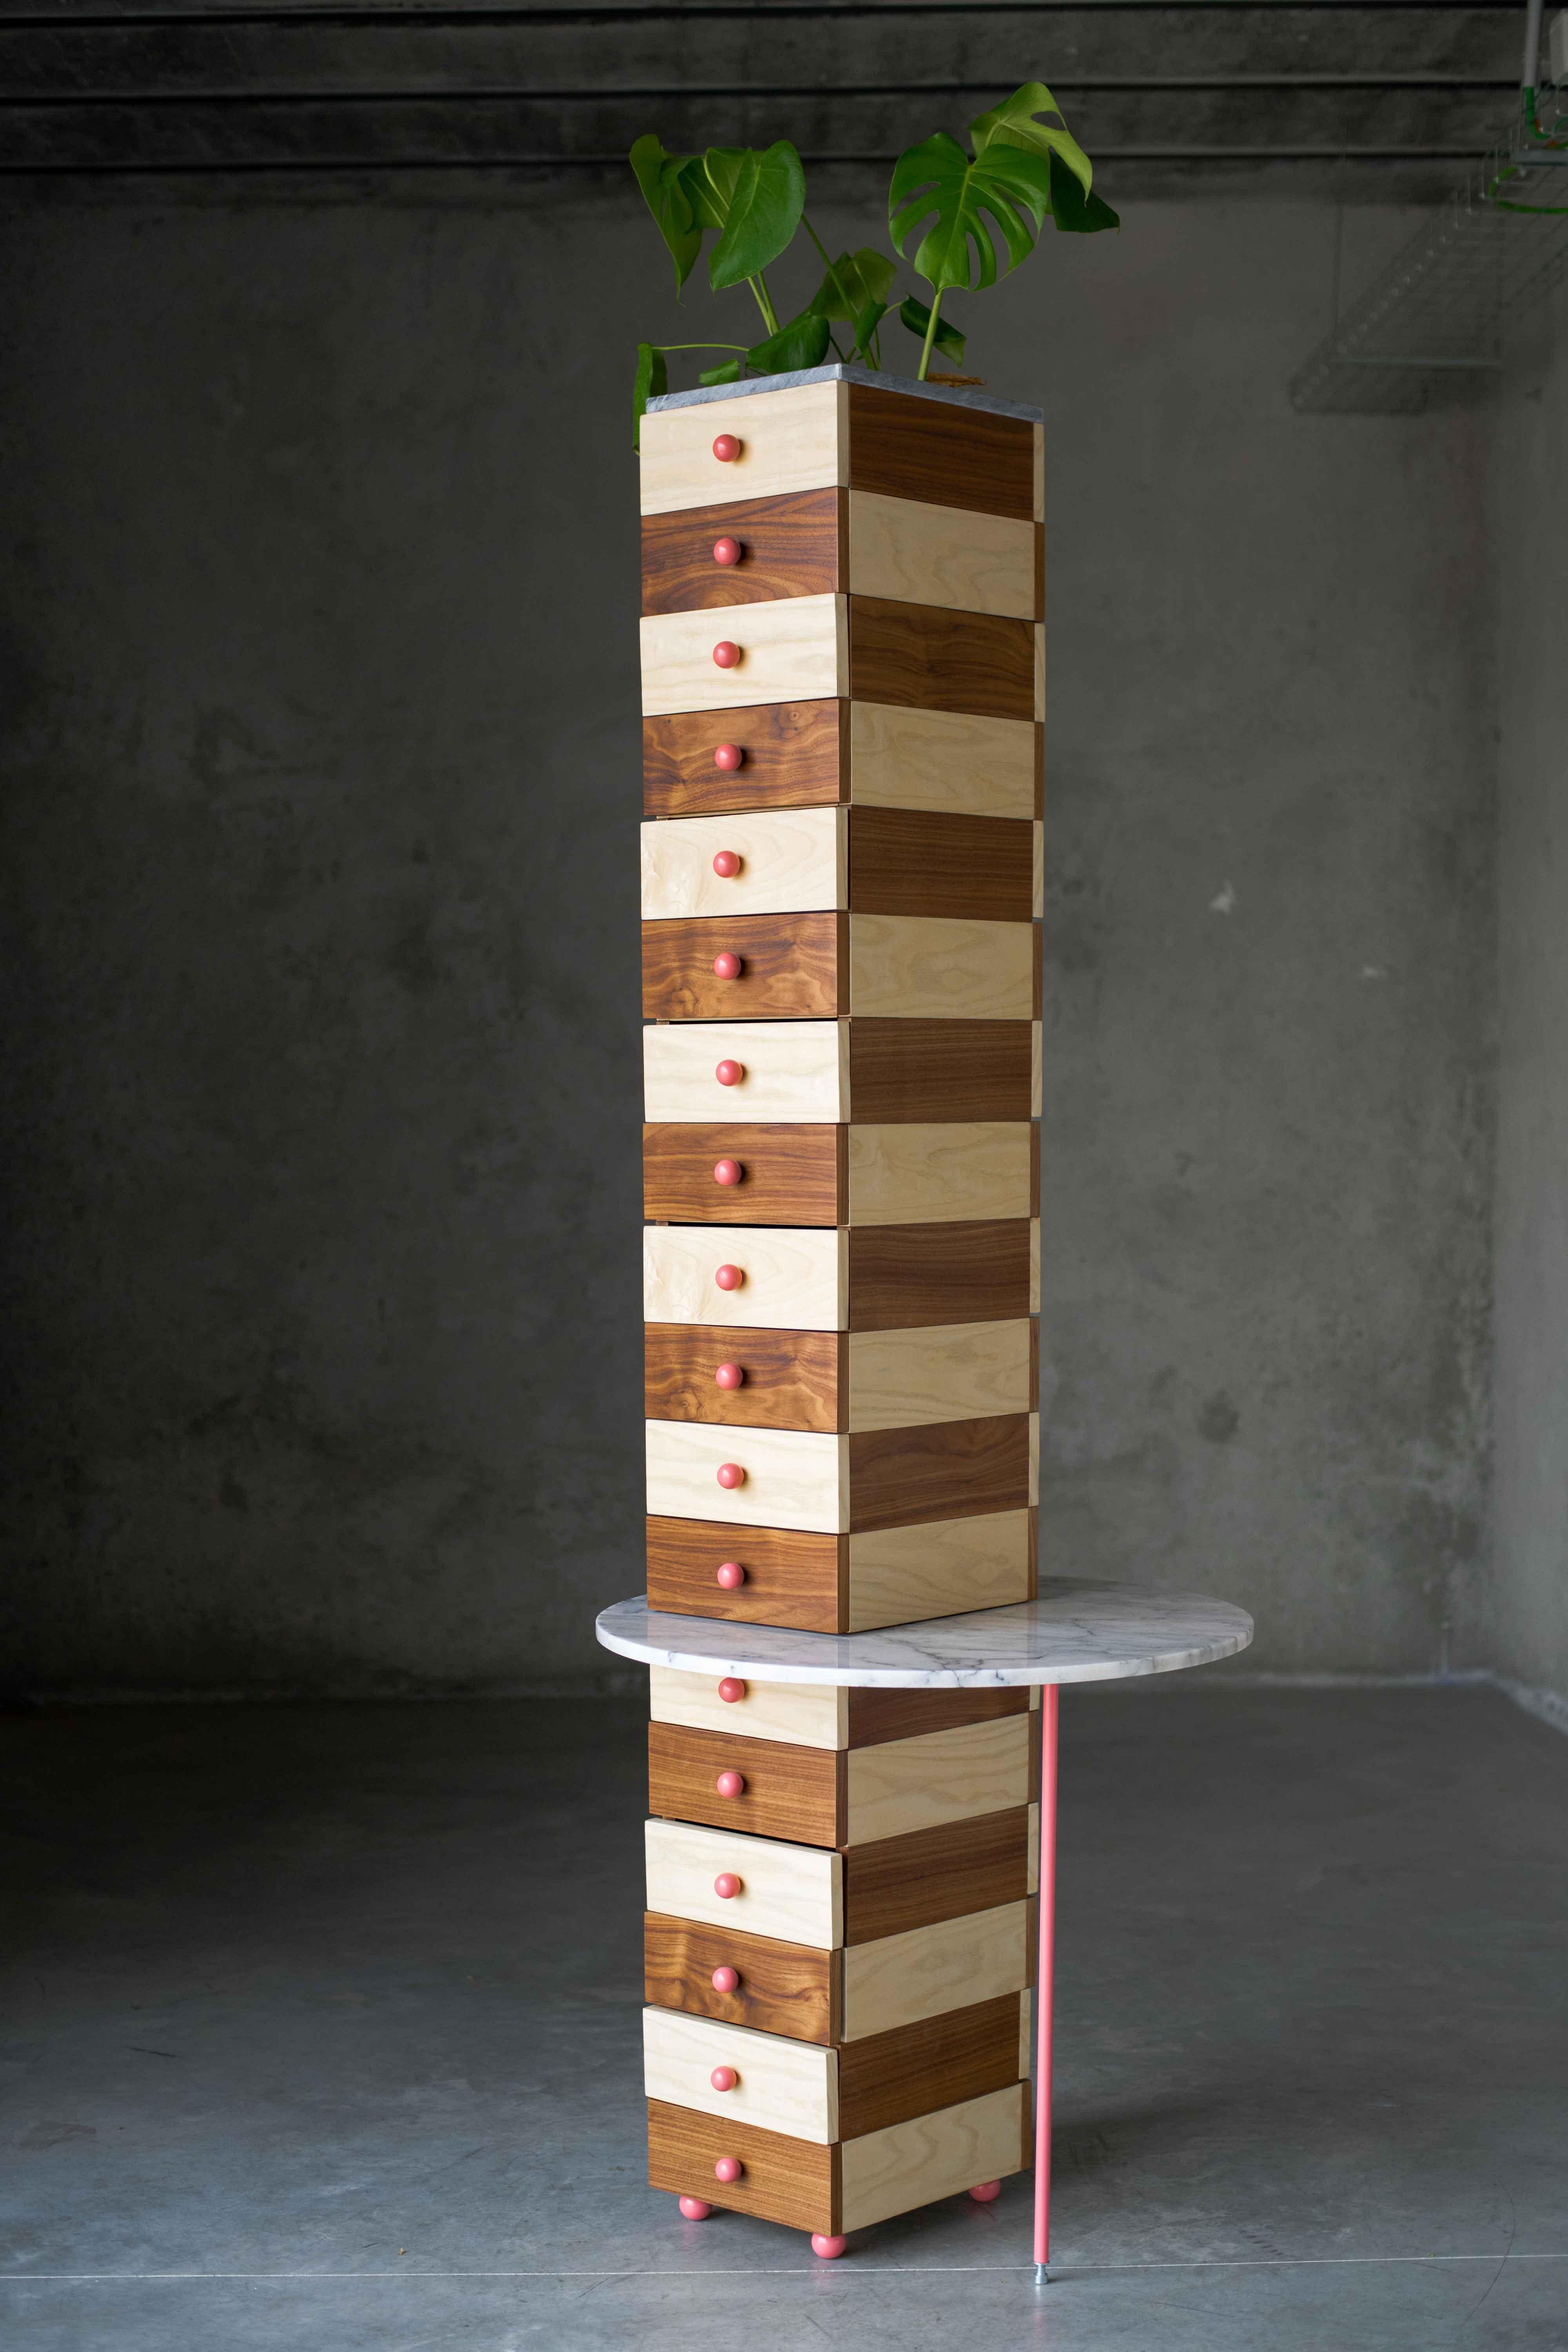 Bonheur Du Jour drawer by MOB 
Limited editions of 15 + 1 prototype
Designer: Fala Atelier (Portugal)
Dimensions: H 200 x D 30 x W 65 cm
Material: Ash wood, walnut wood, lackered wood, pink wood knobs, estremoz marble, negro